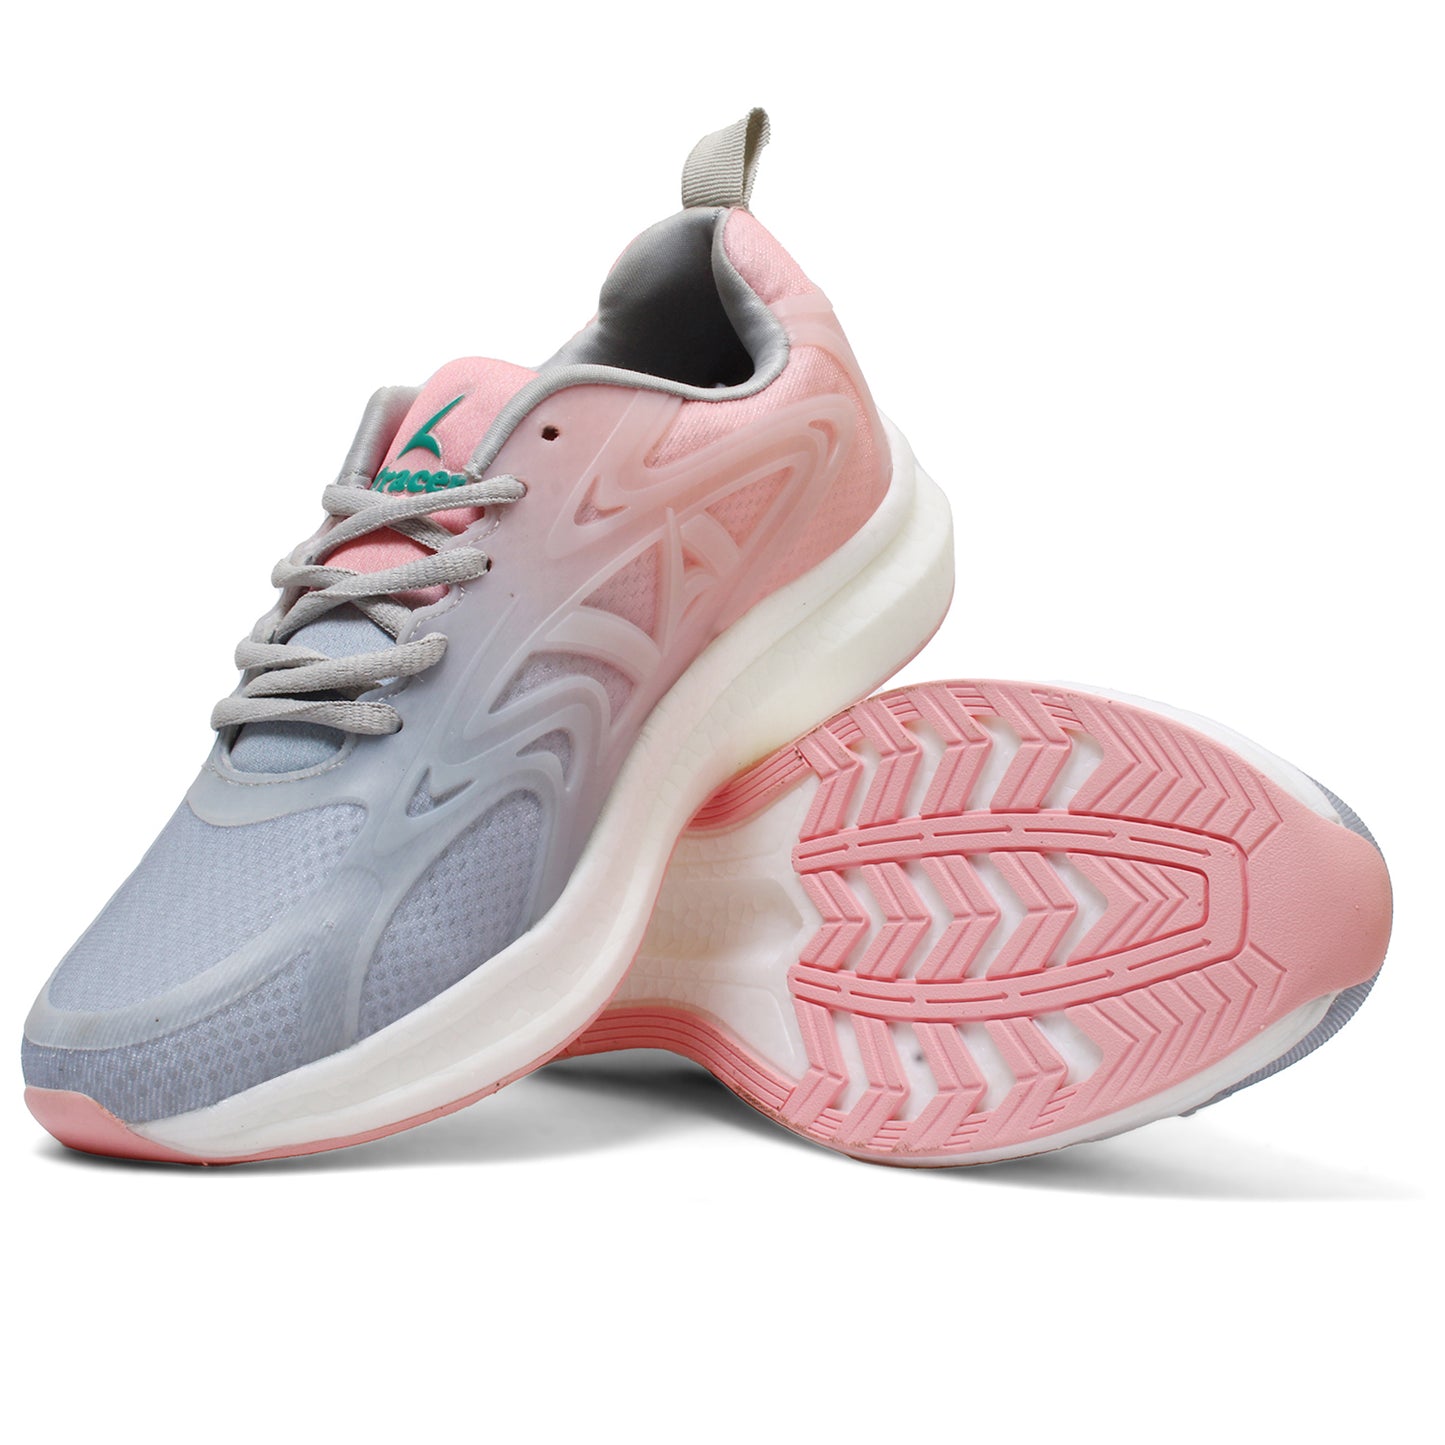 Tracer India | Pink | Women's Sneaker